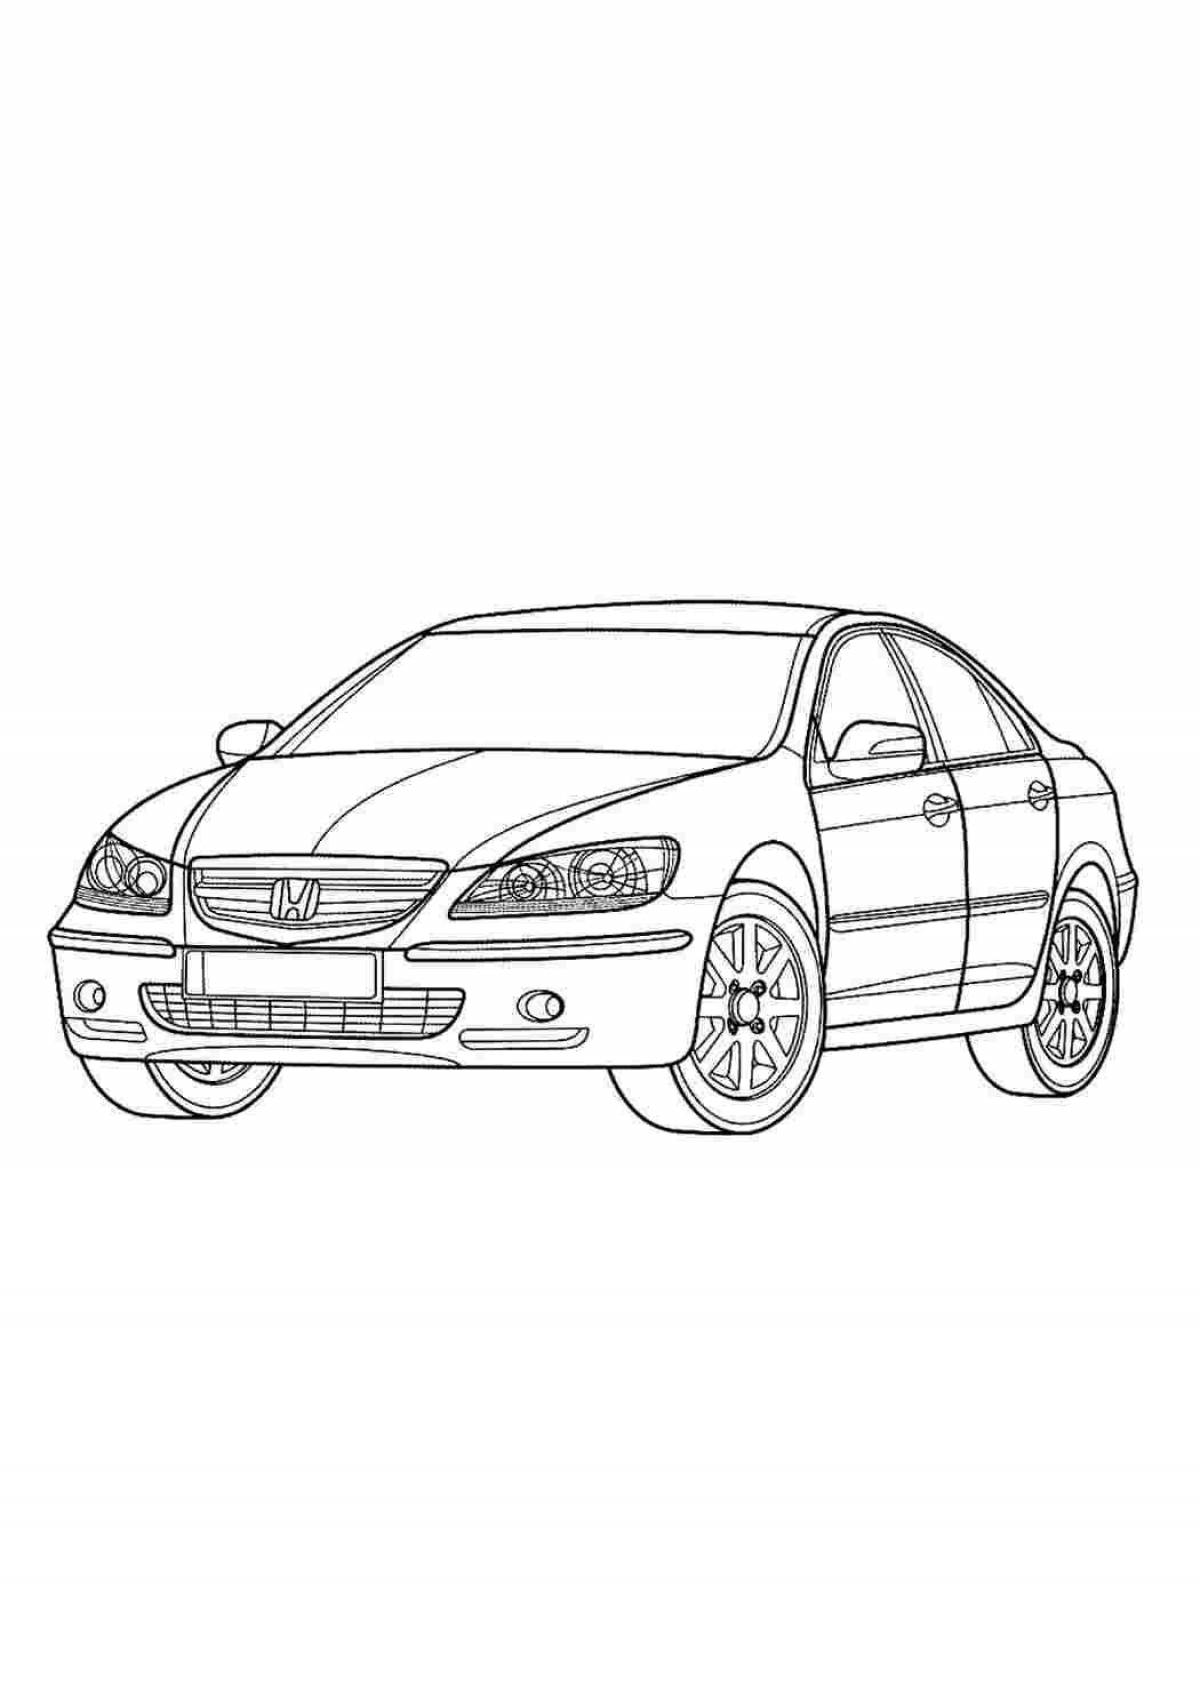 Coloring page mysterious honda accord